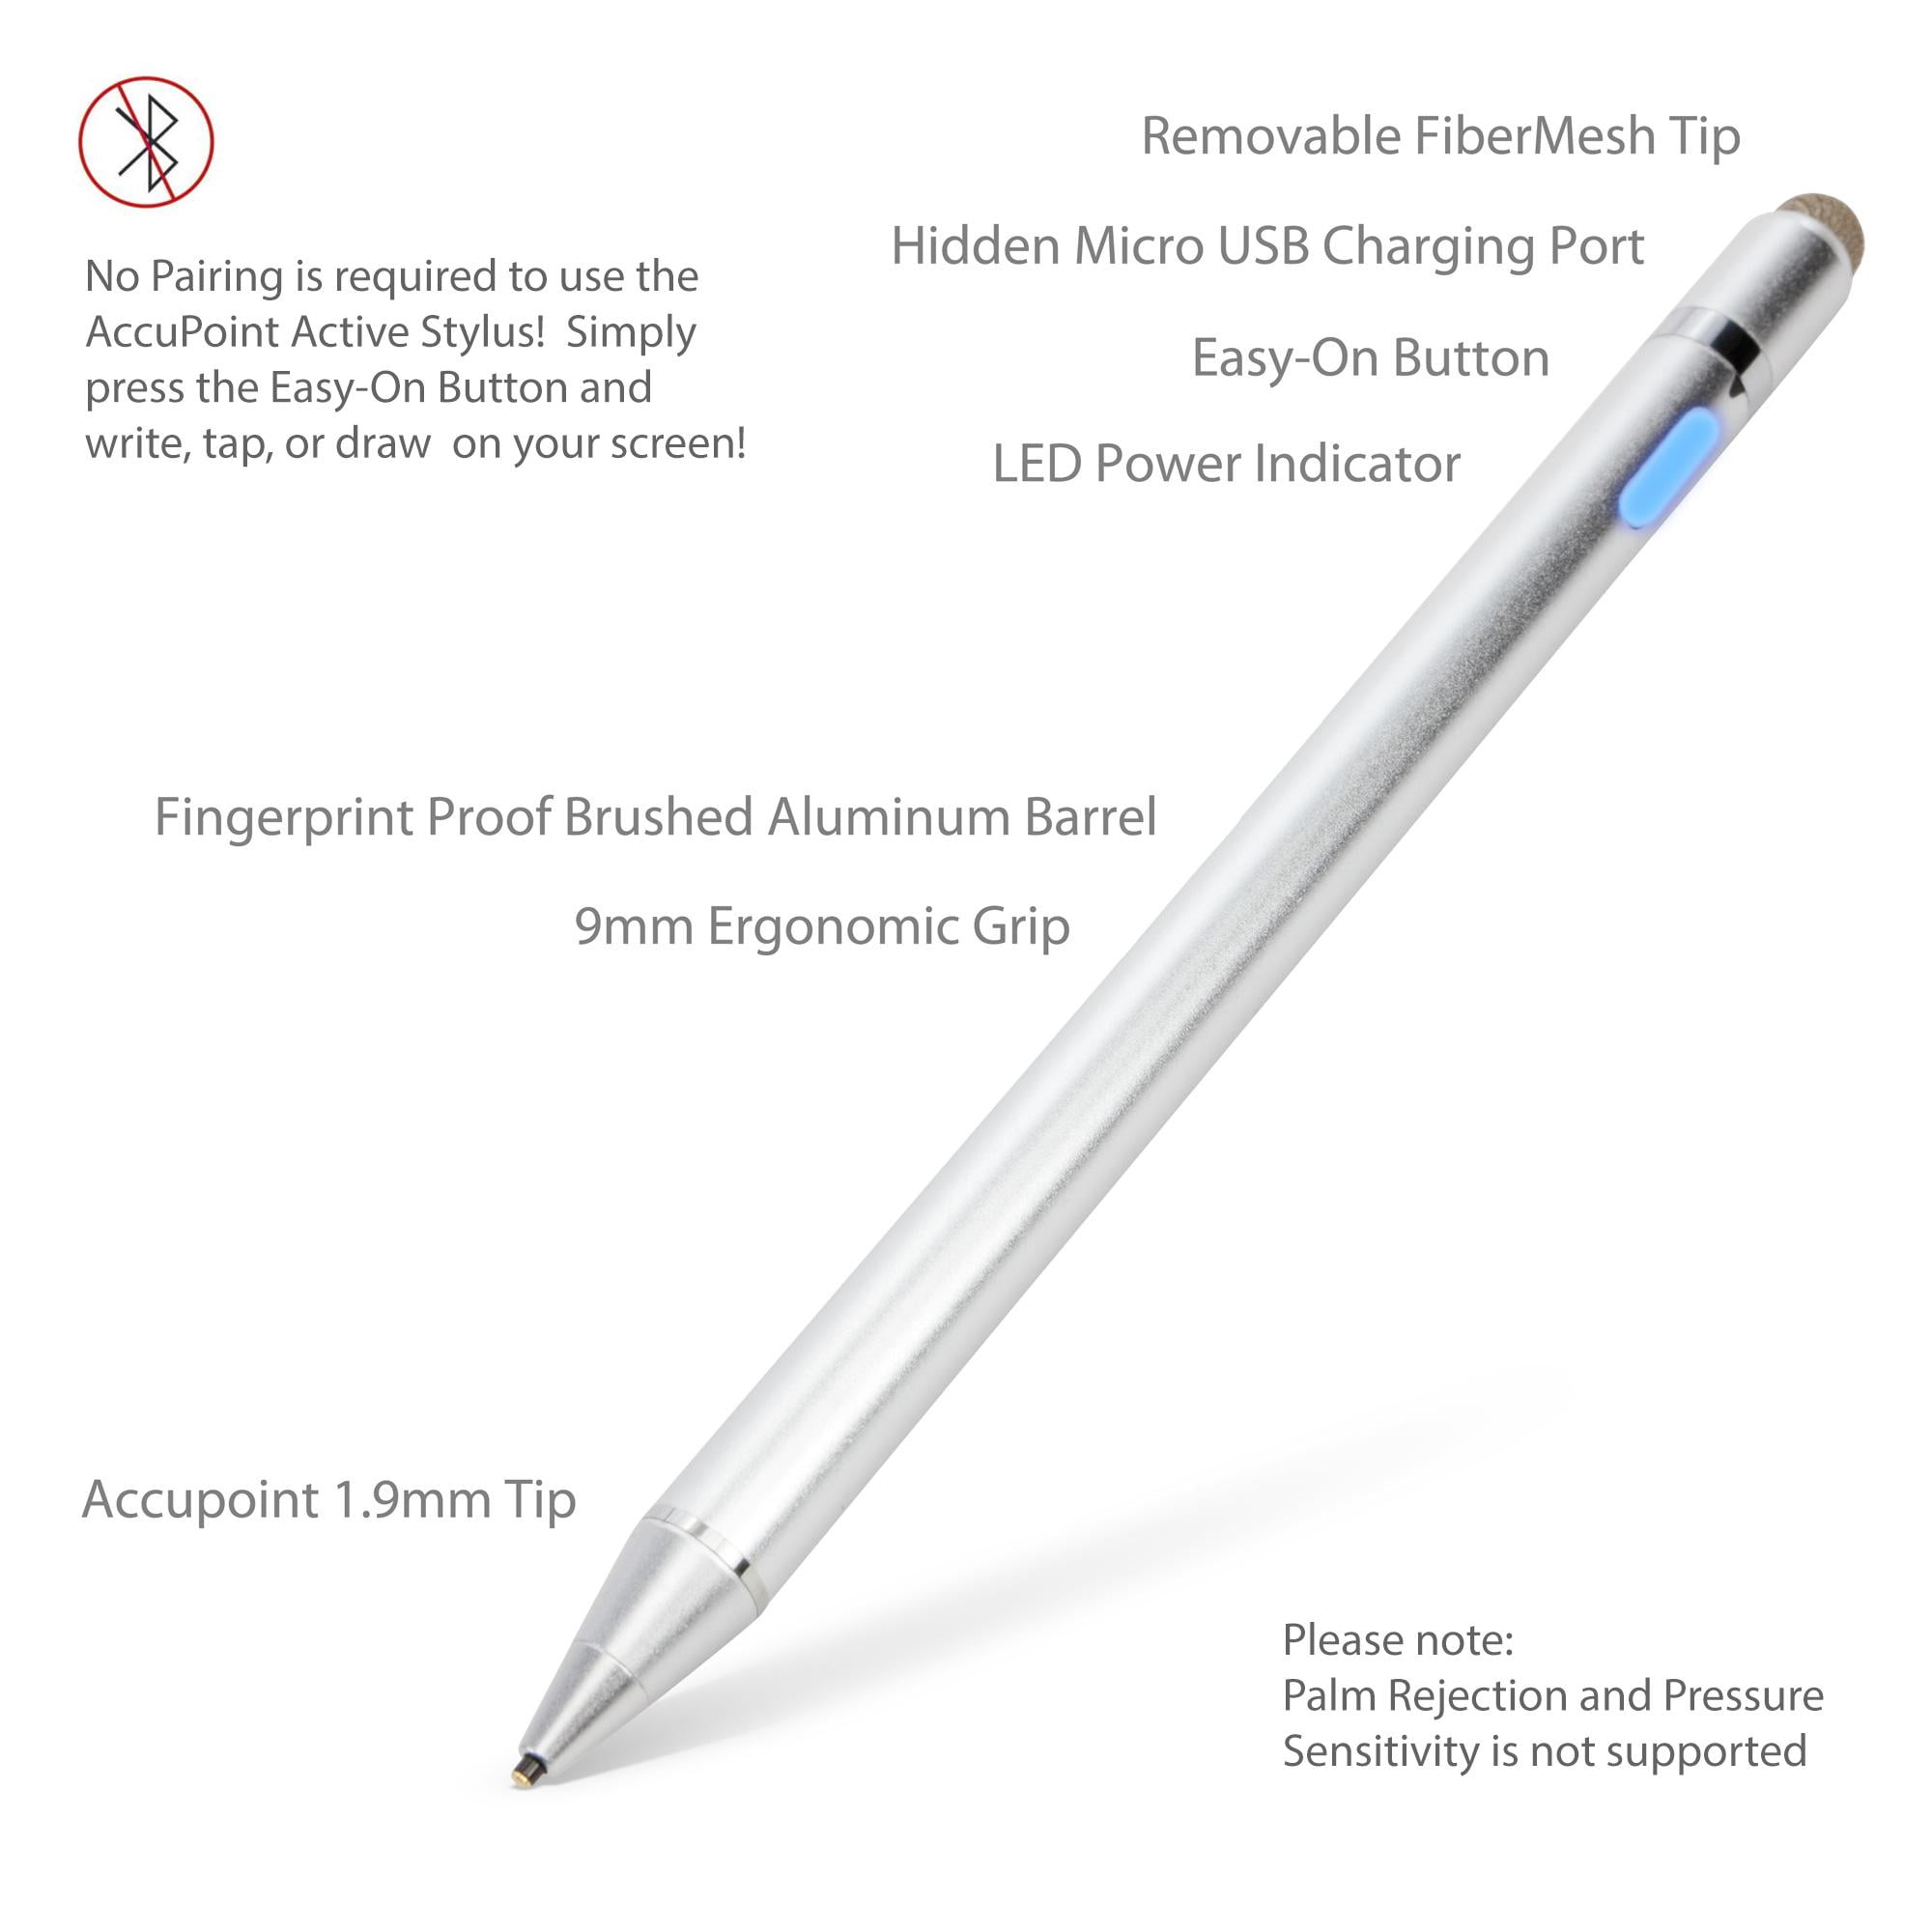 Metallic Silver AccuPoint Active Stylus Electronic Stylus with Ultra Fine Tip for HP ProBook 440 G6 BoxWave HP ProBook 440 G6 Stylus Pen 